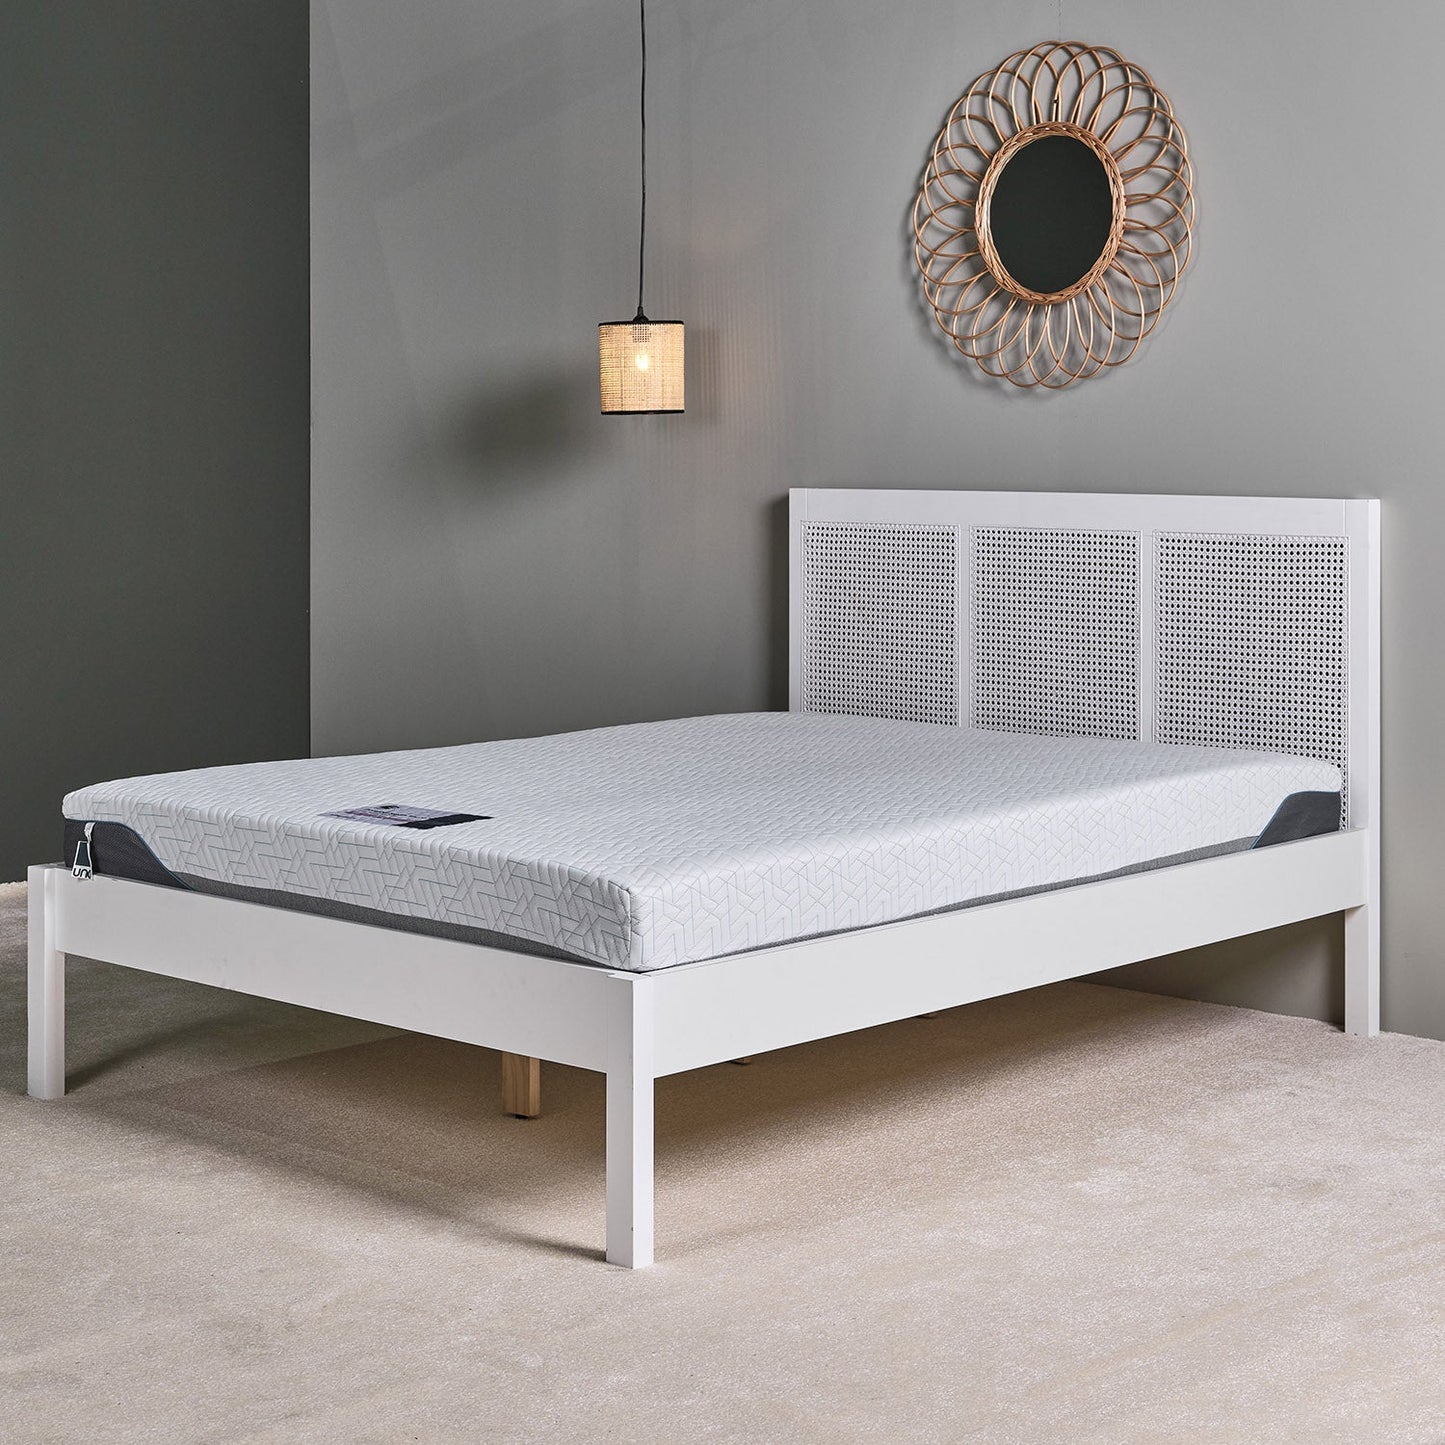 Charlie king bed and mattress set - white - Laura James